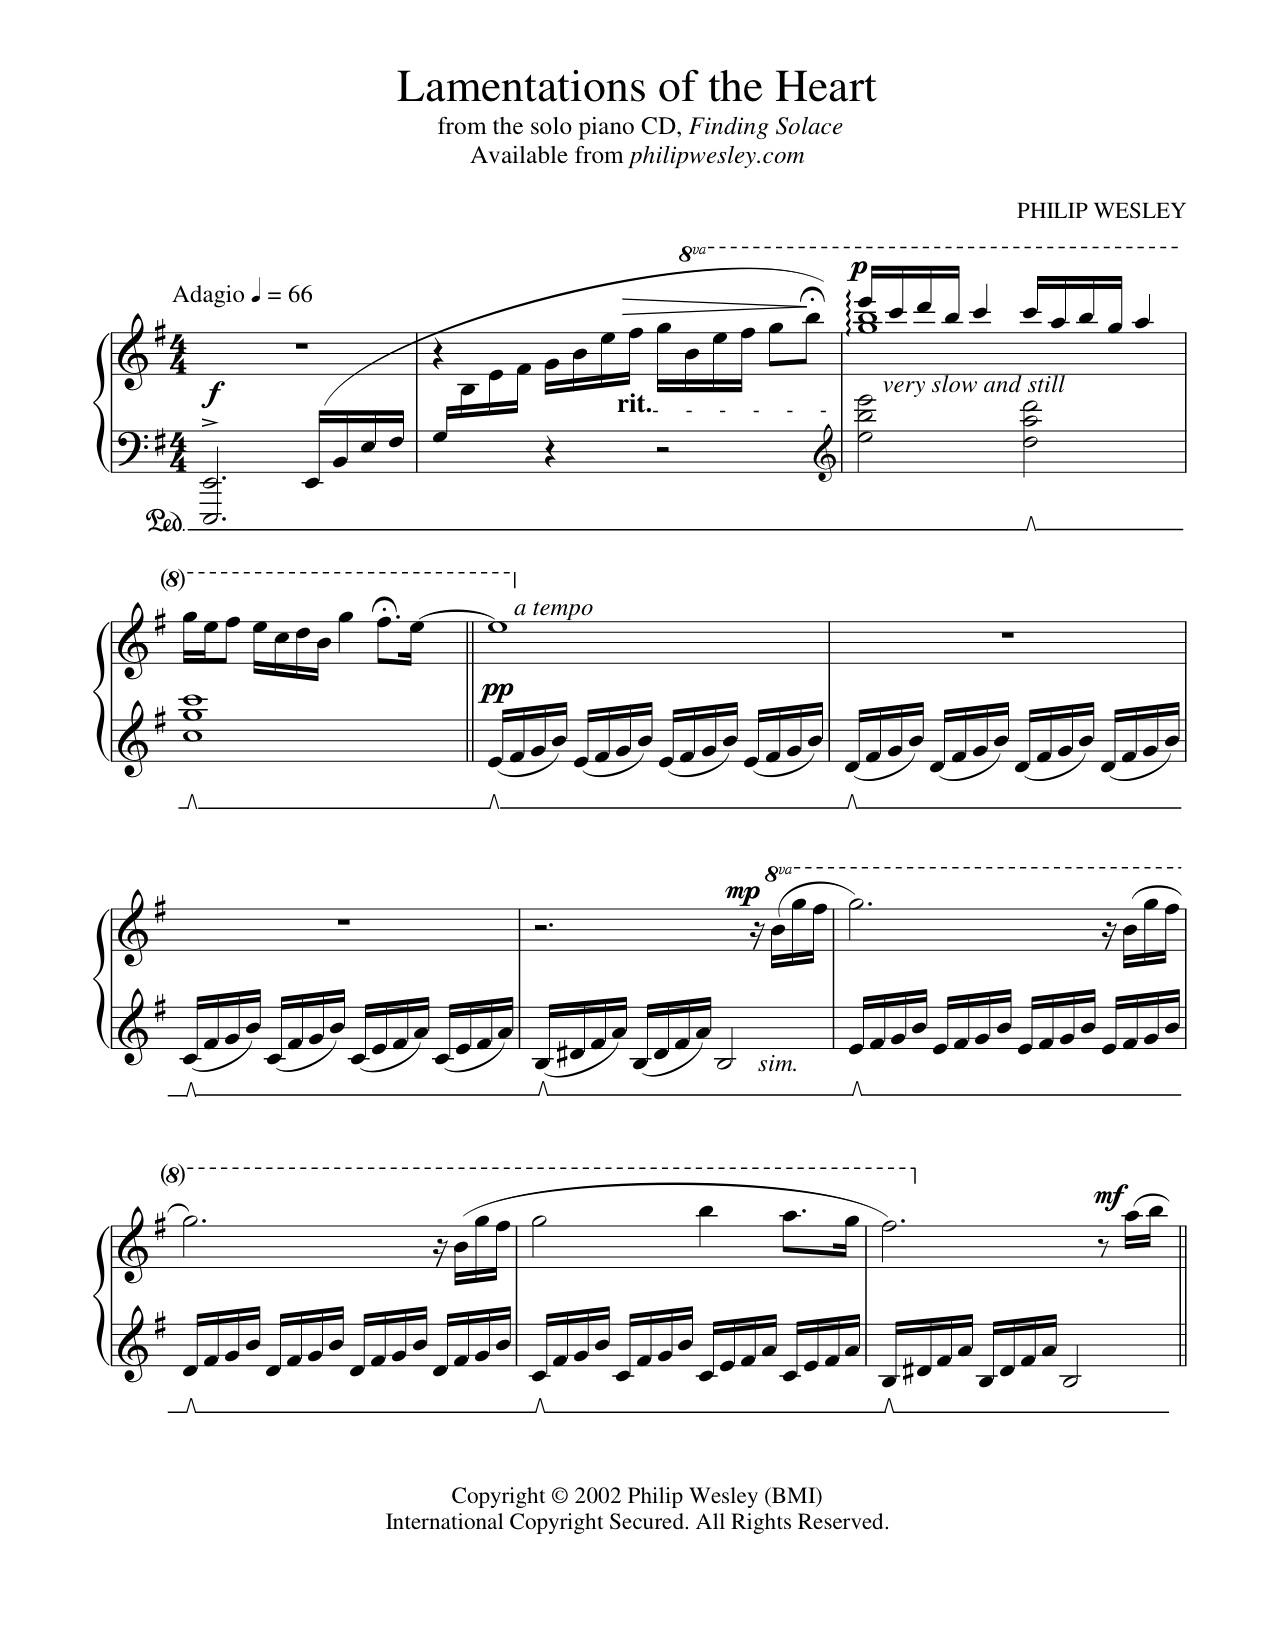 Supone soltero cultura Lamentations of the Heart - Finding Solace - Sheet Music - Philip Wesley